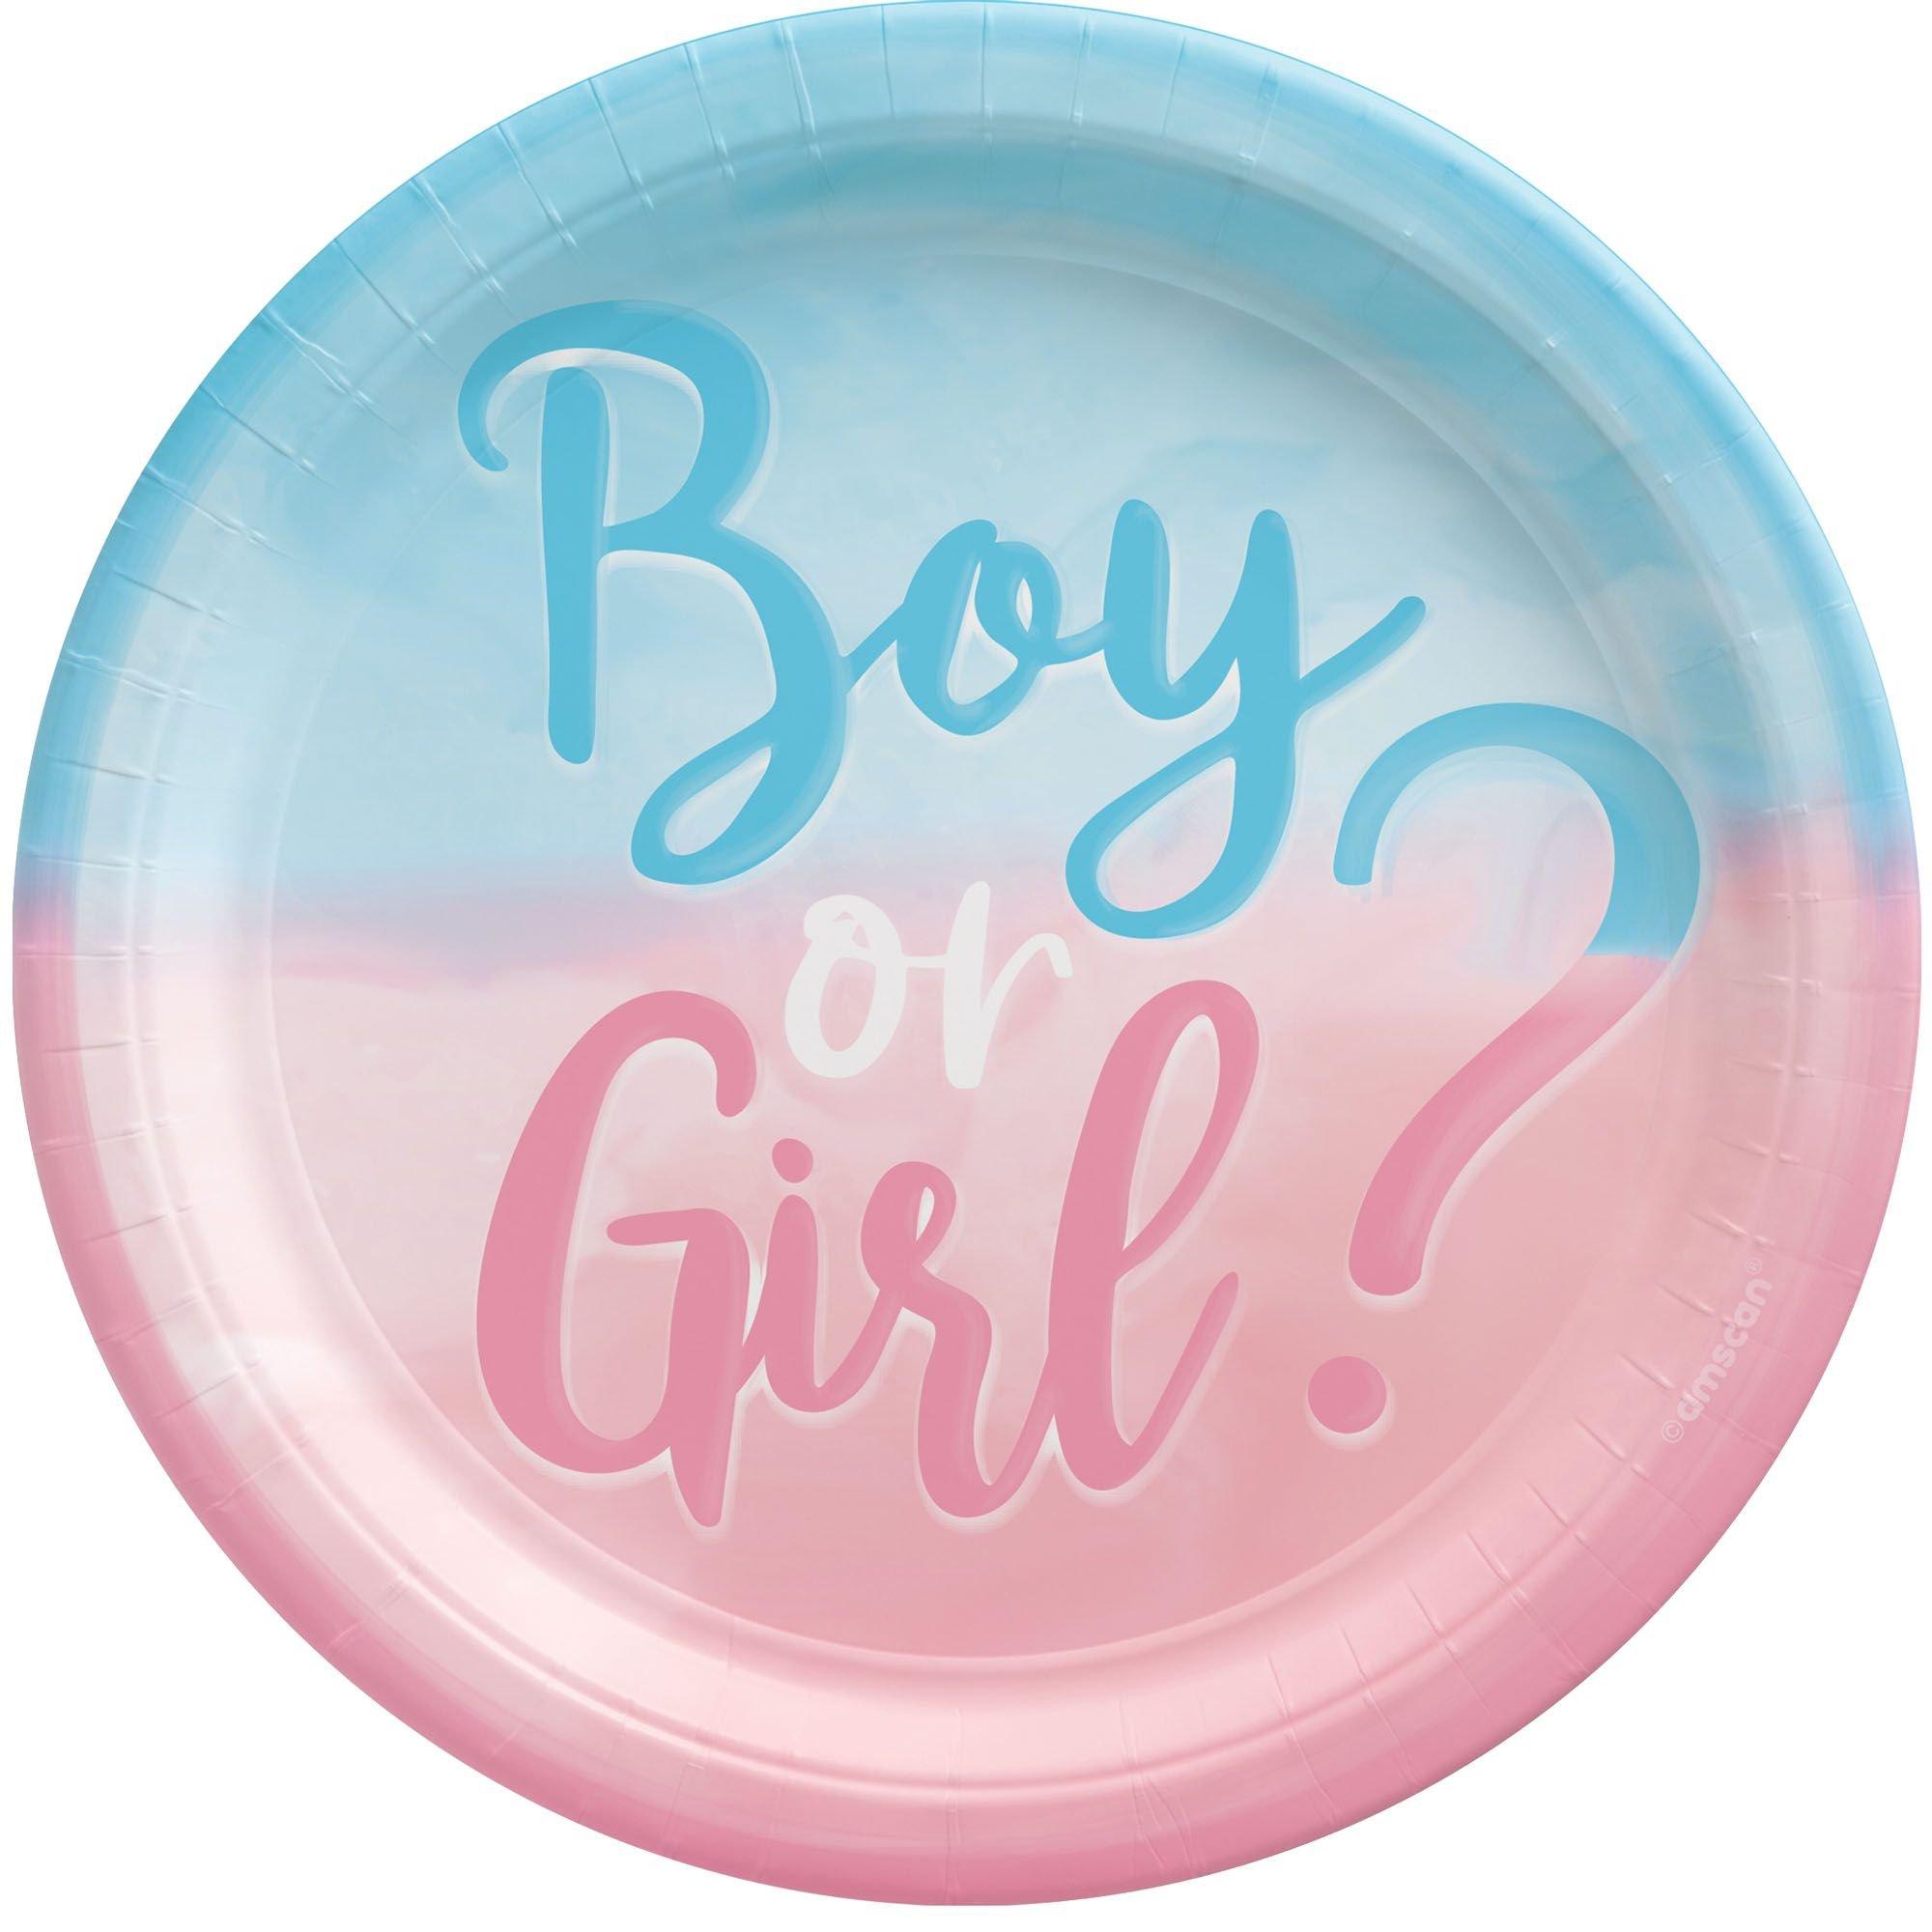 Boy or Girl? Gender Reveal Paper Dinner Plates, 10.5in, 8ct - The Big Reveal